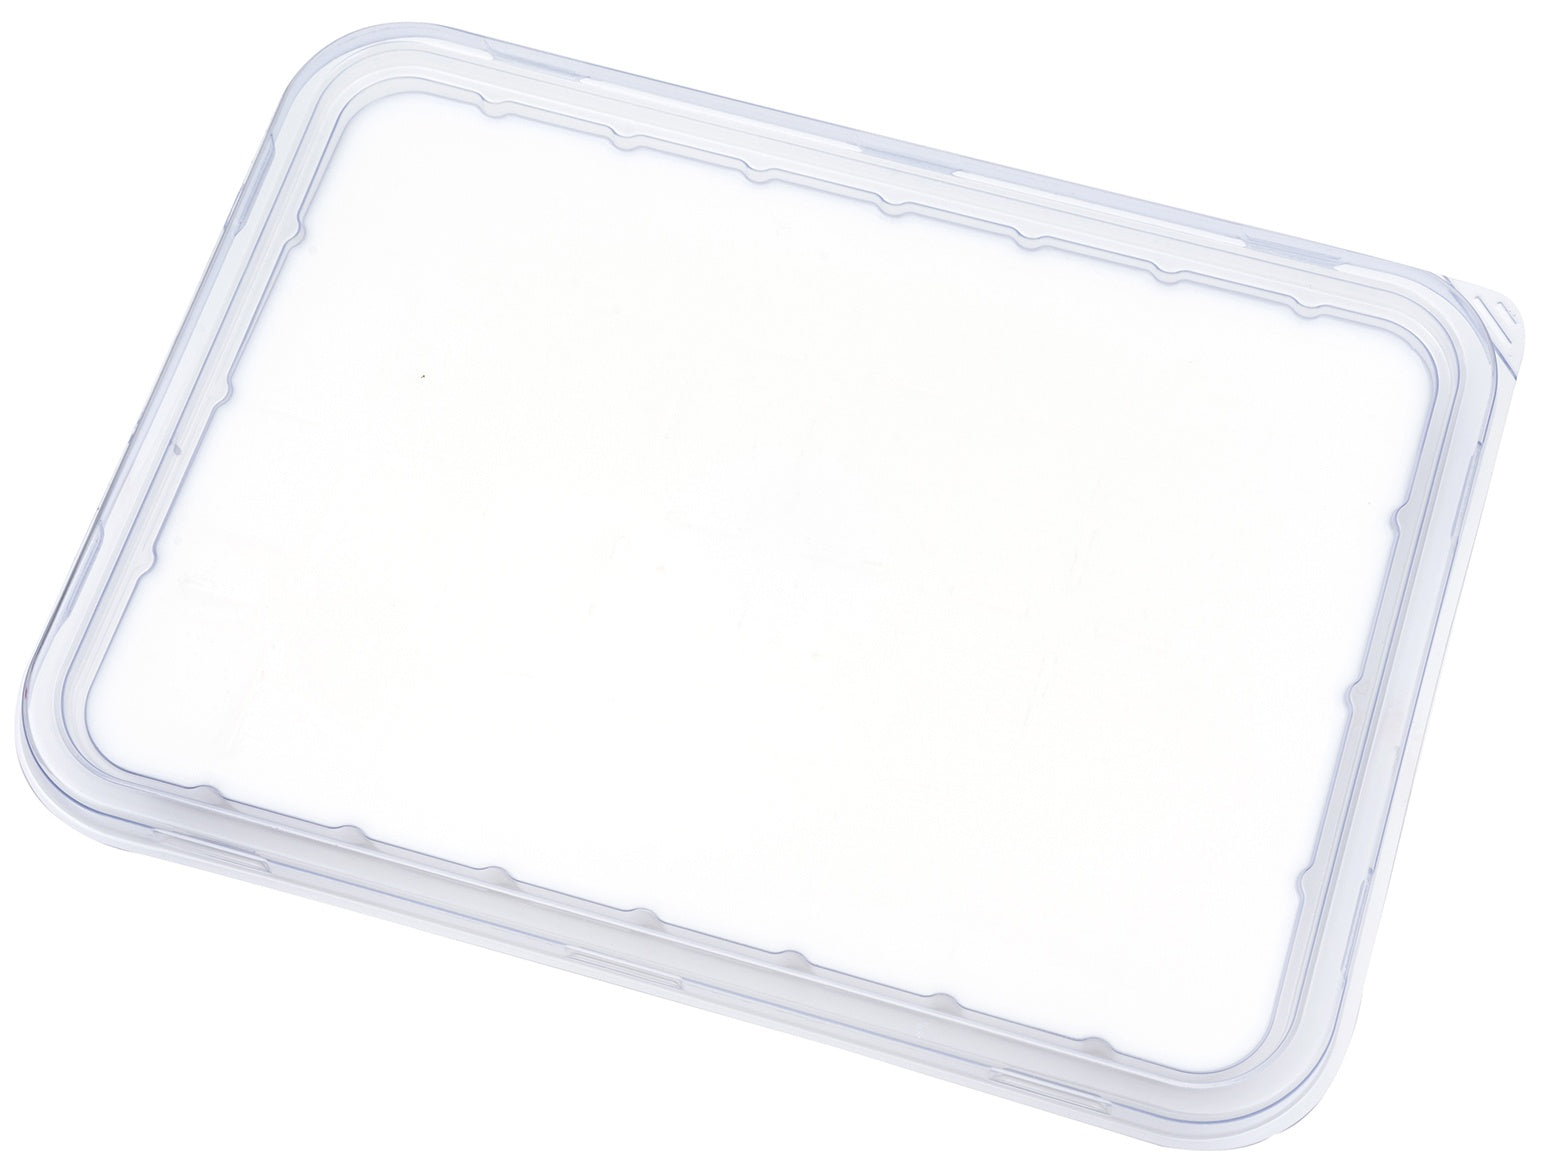 We R Memory Keepers Suds Soap Making Mold - Rectangles